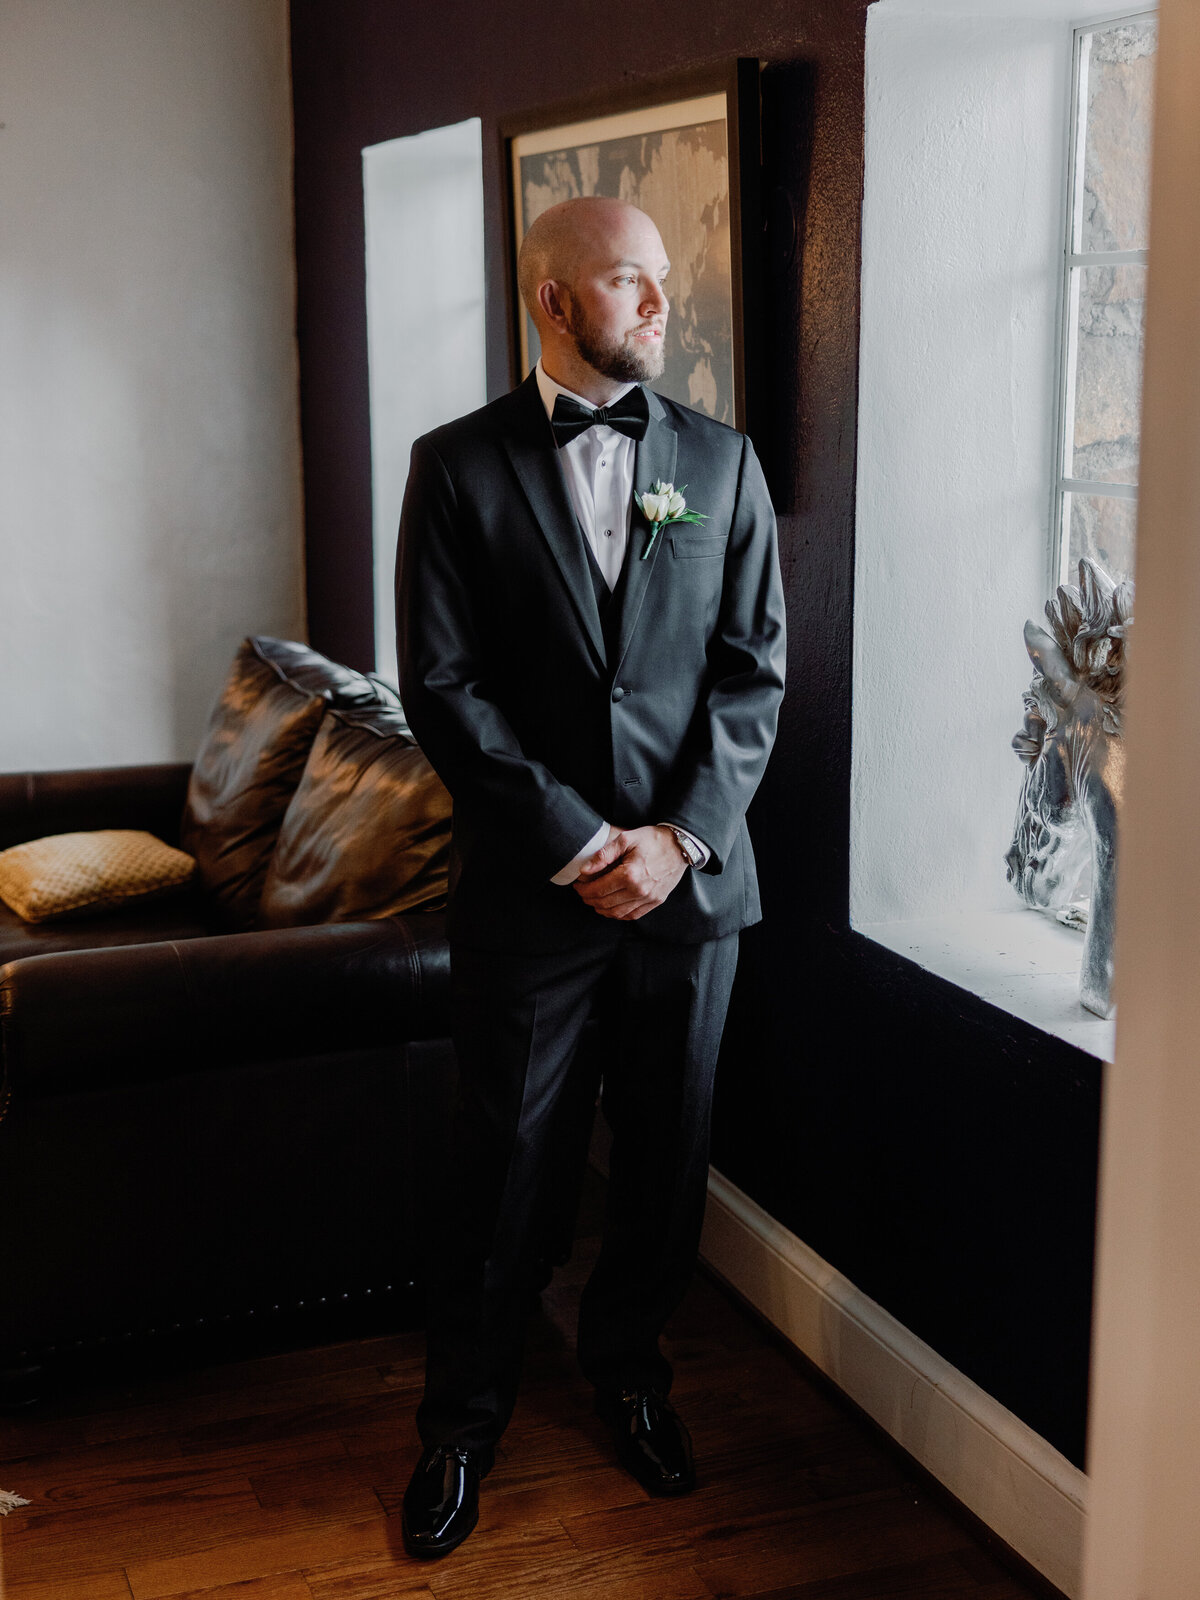 A groom stands near a window in his wedding suit with his hands held in front of his body